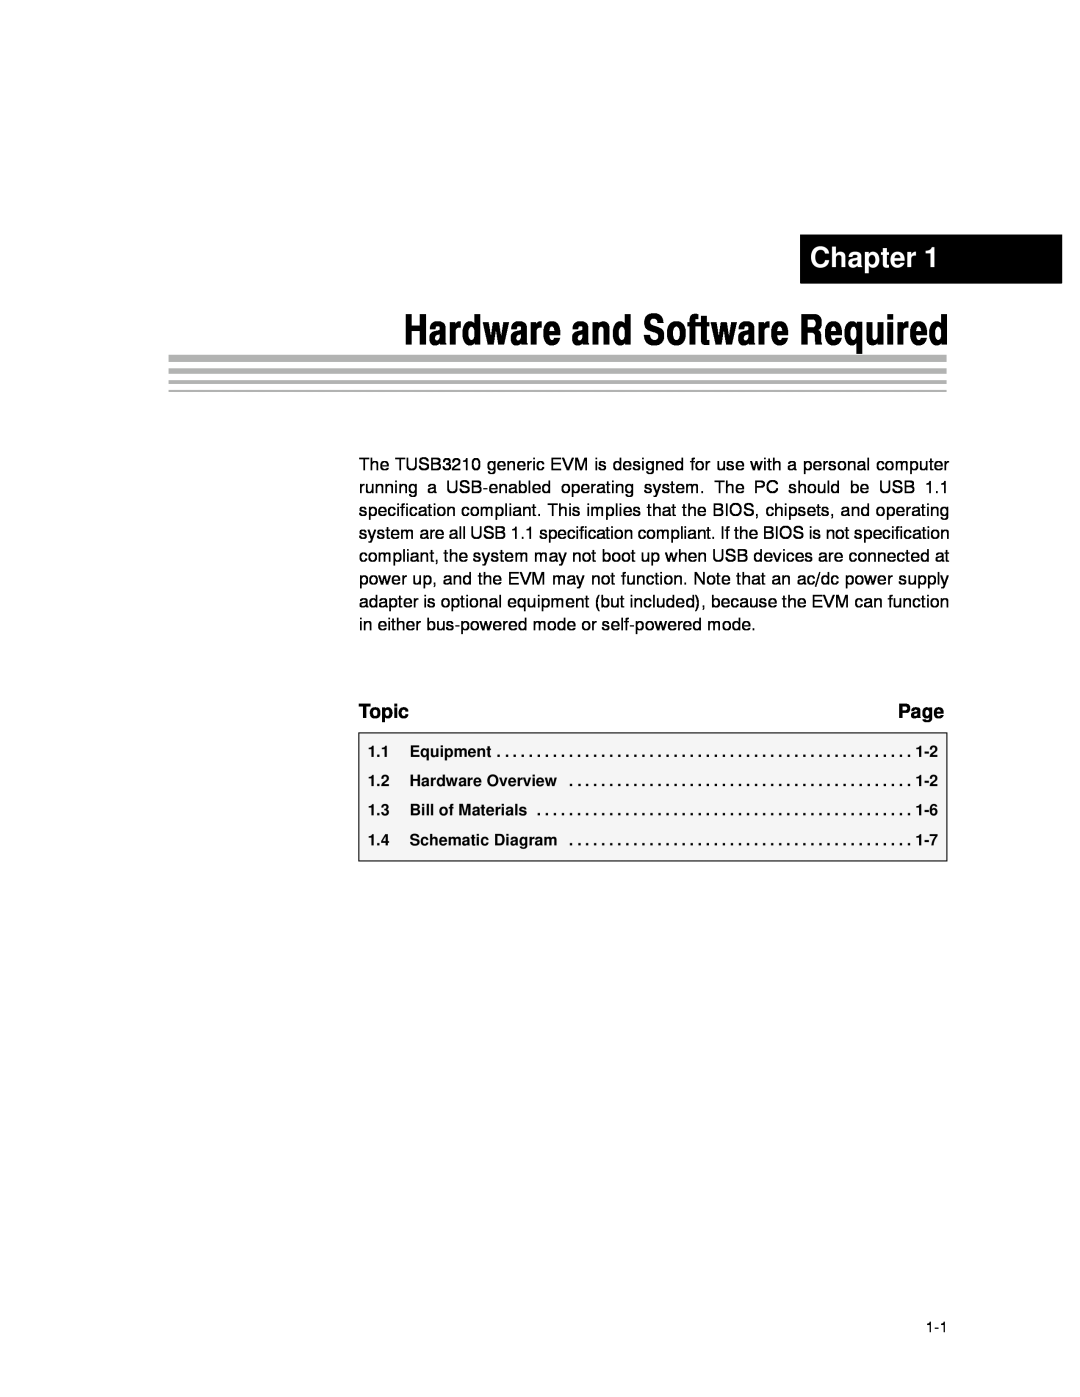 Texas Instruments TUSB3210 manual Hardware and Software Required, Chapter, Page, Topic 